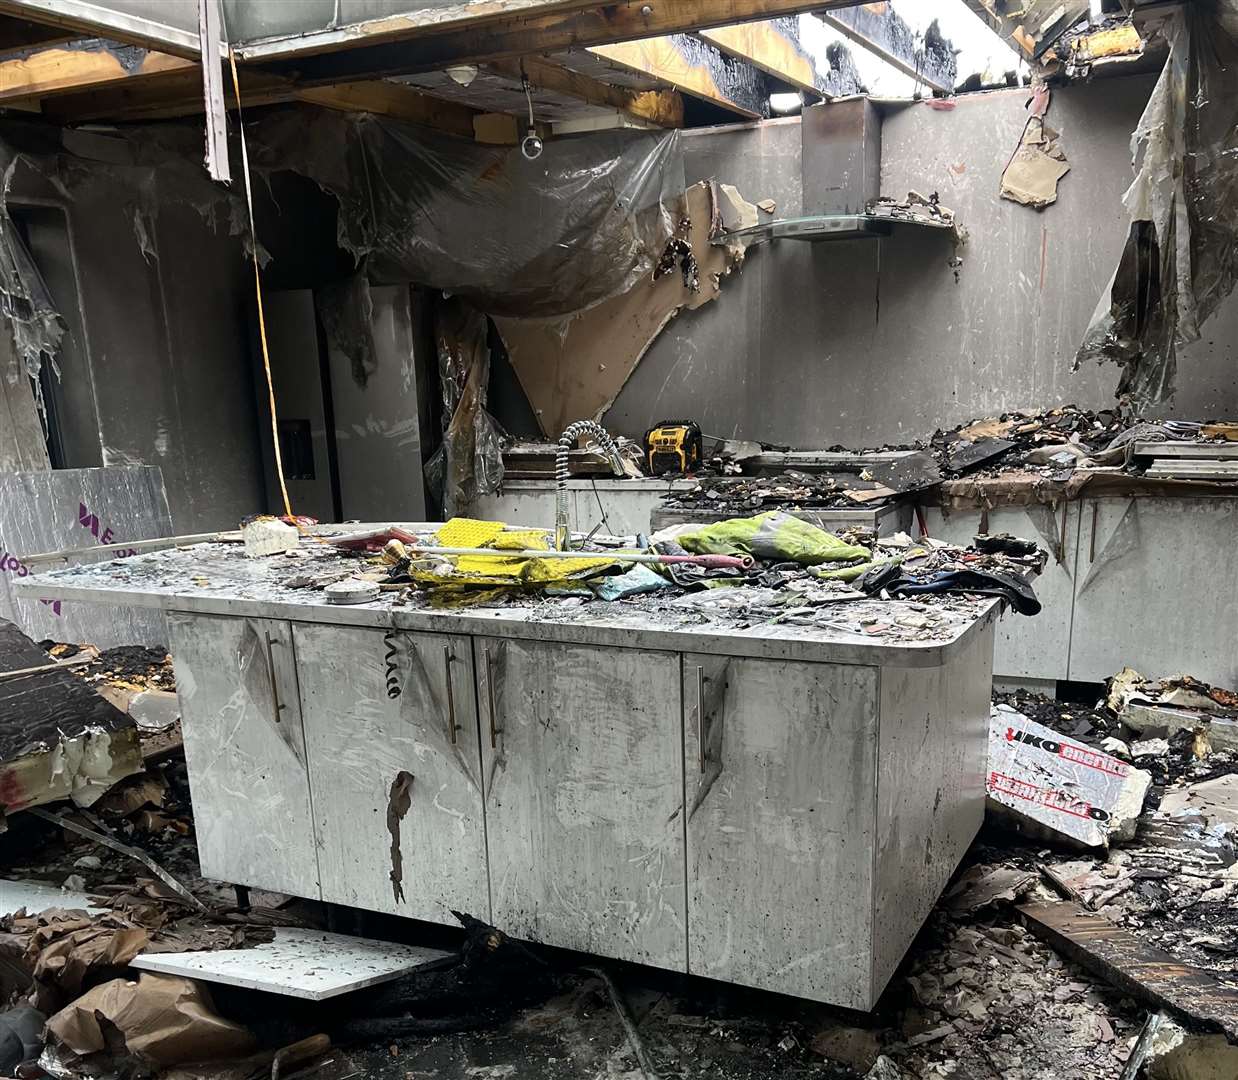 The kitchen in the Hythe house after the blaze